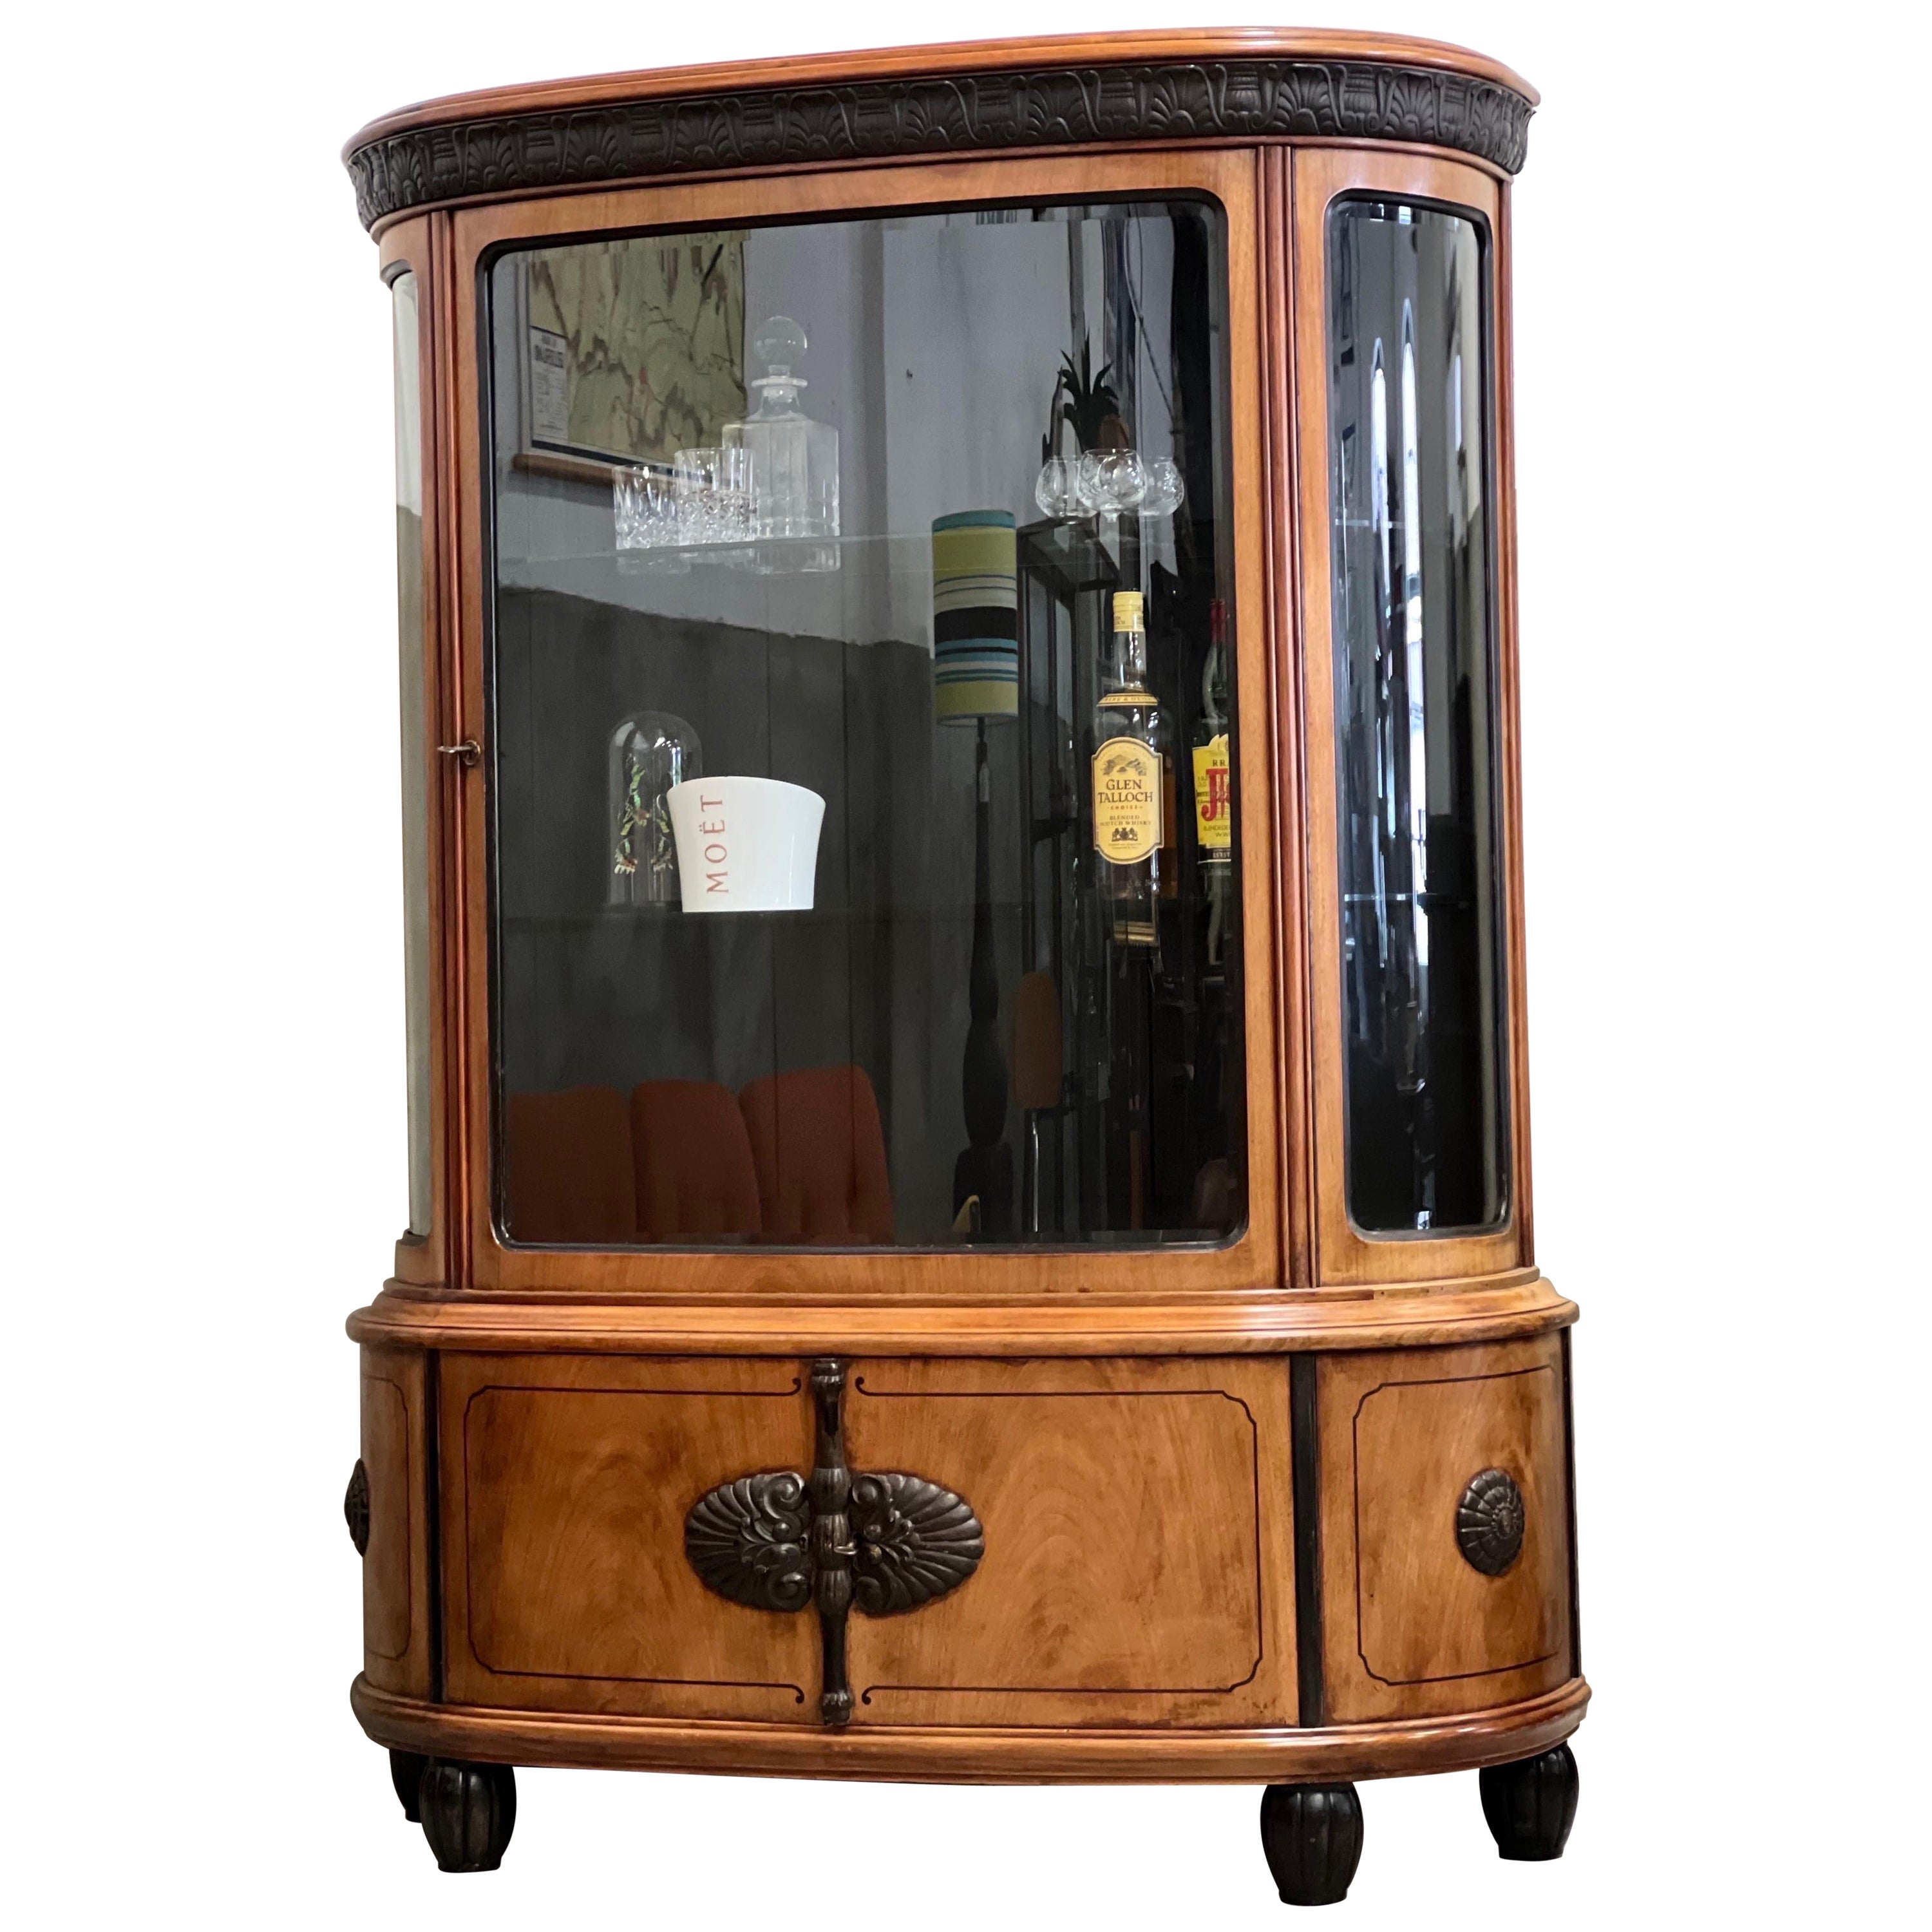 Early 20th Century Art Deco Beverage Cabinet, Curved Glass